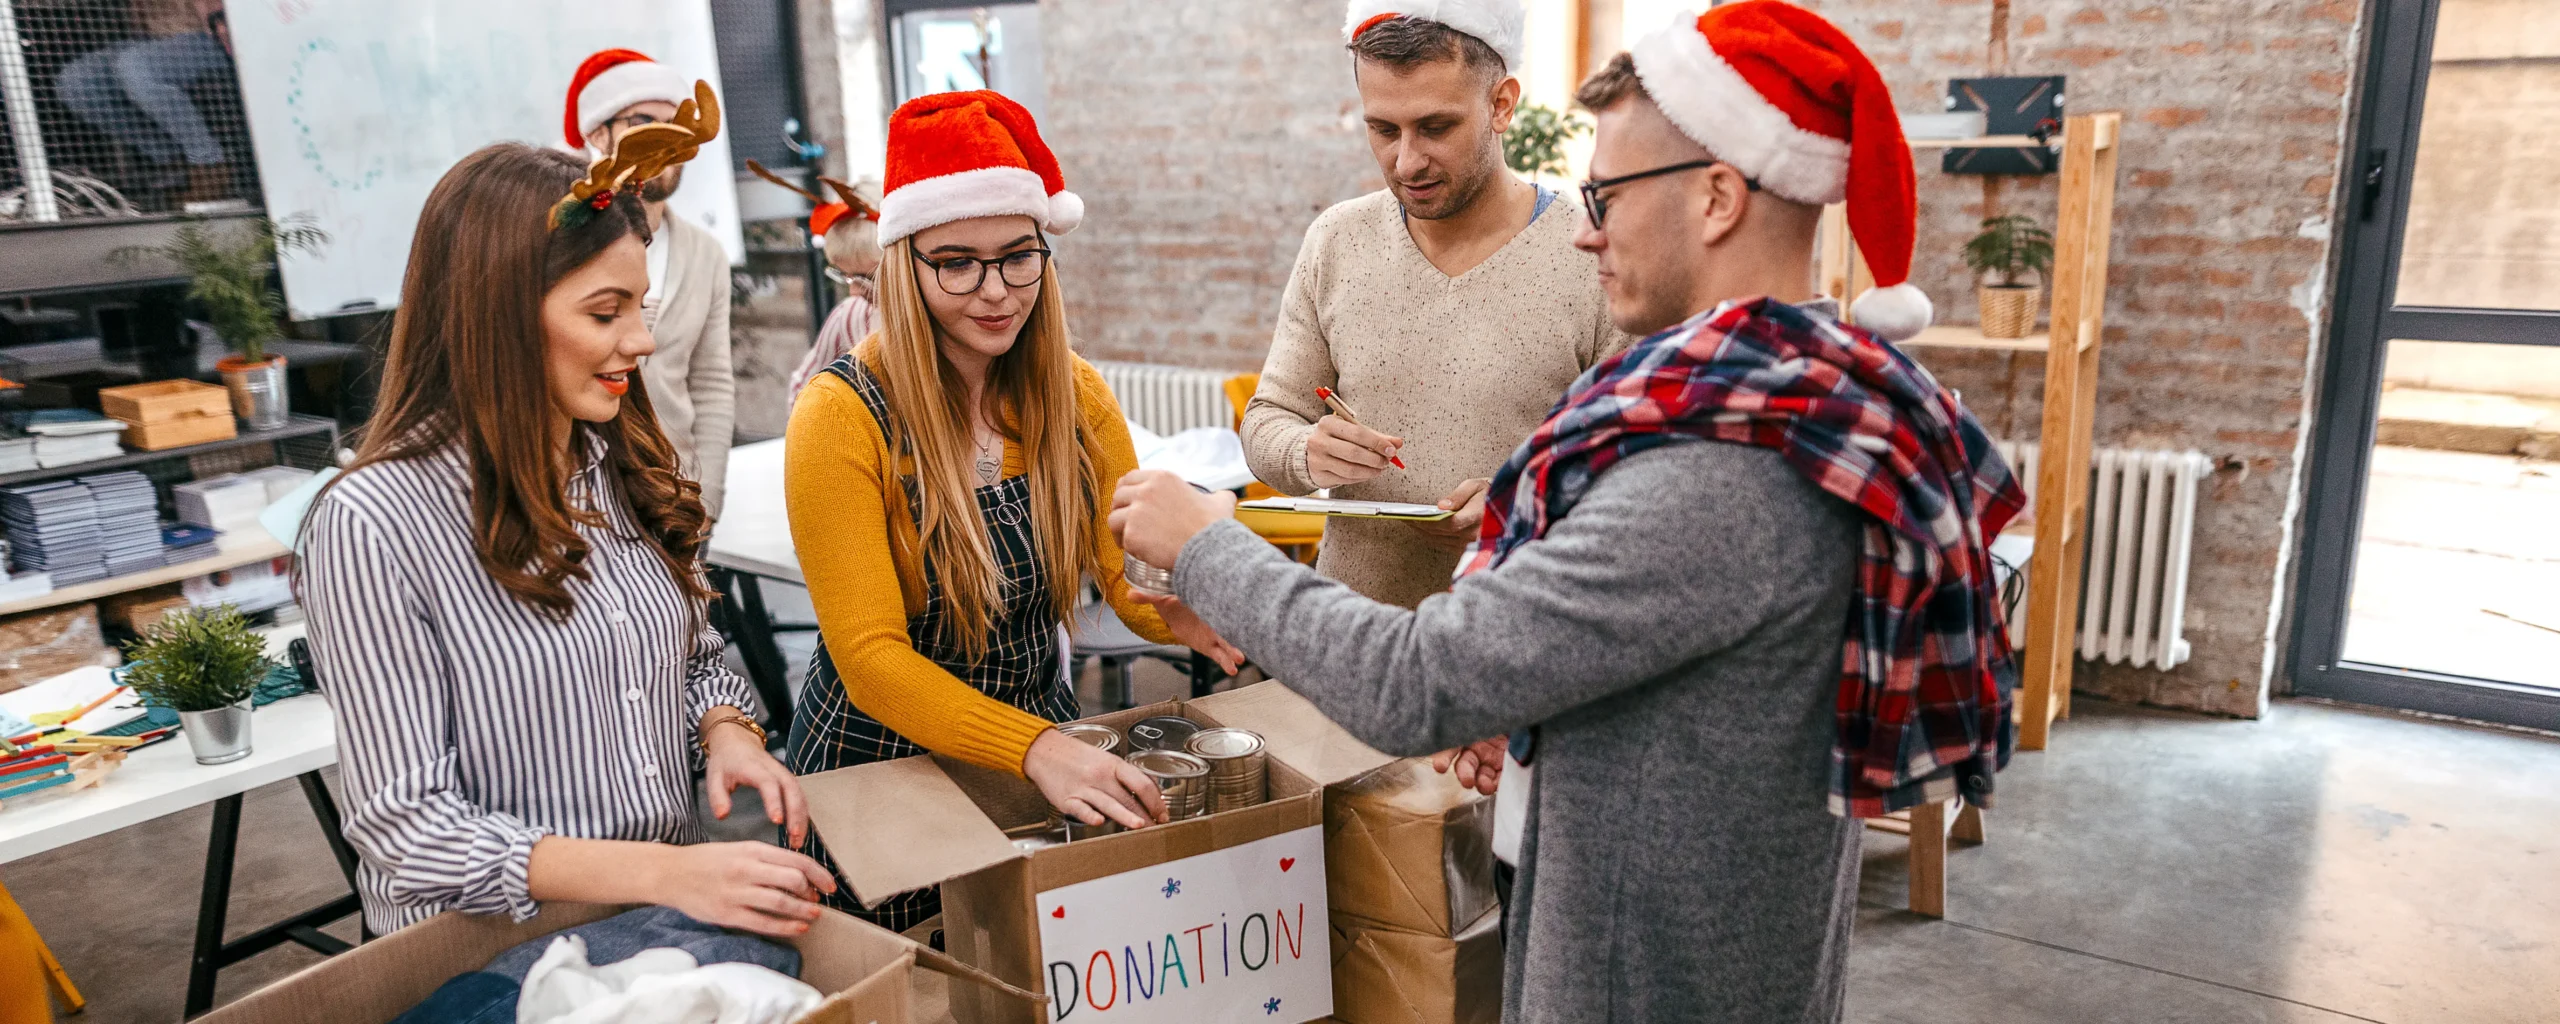 Simpson Associates embraces the spirit of giving in support of local charities